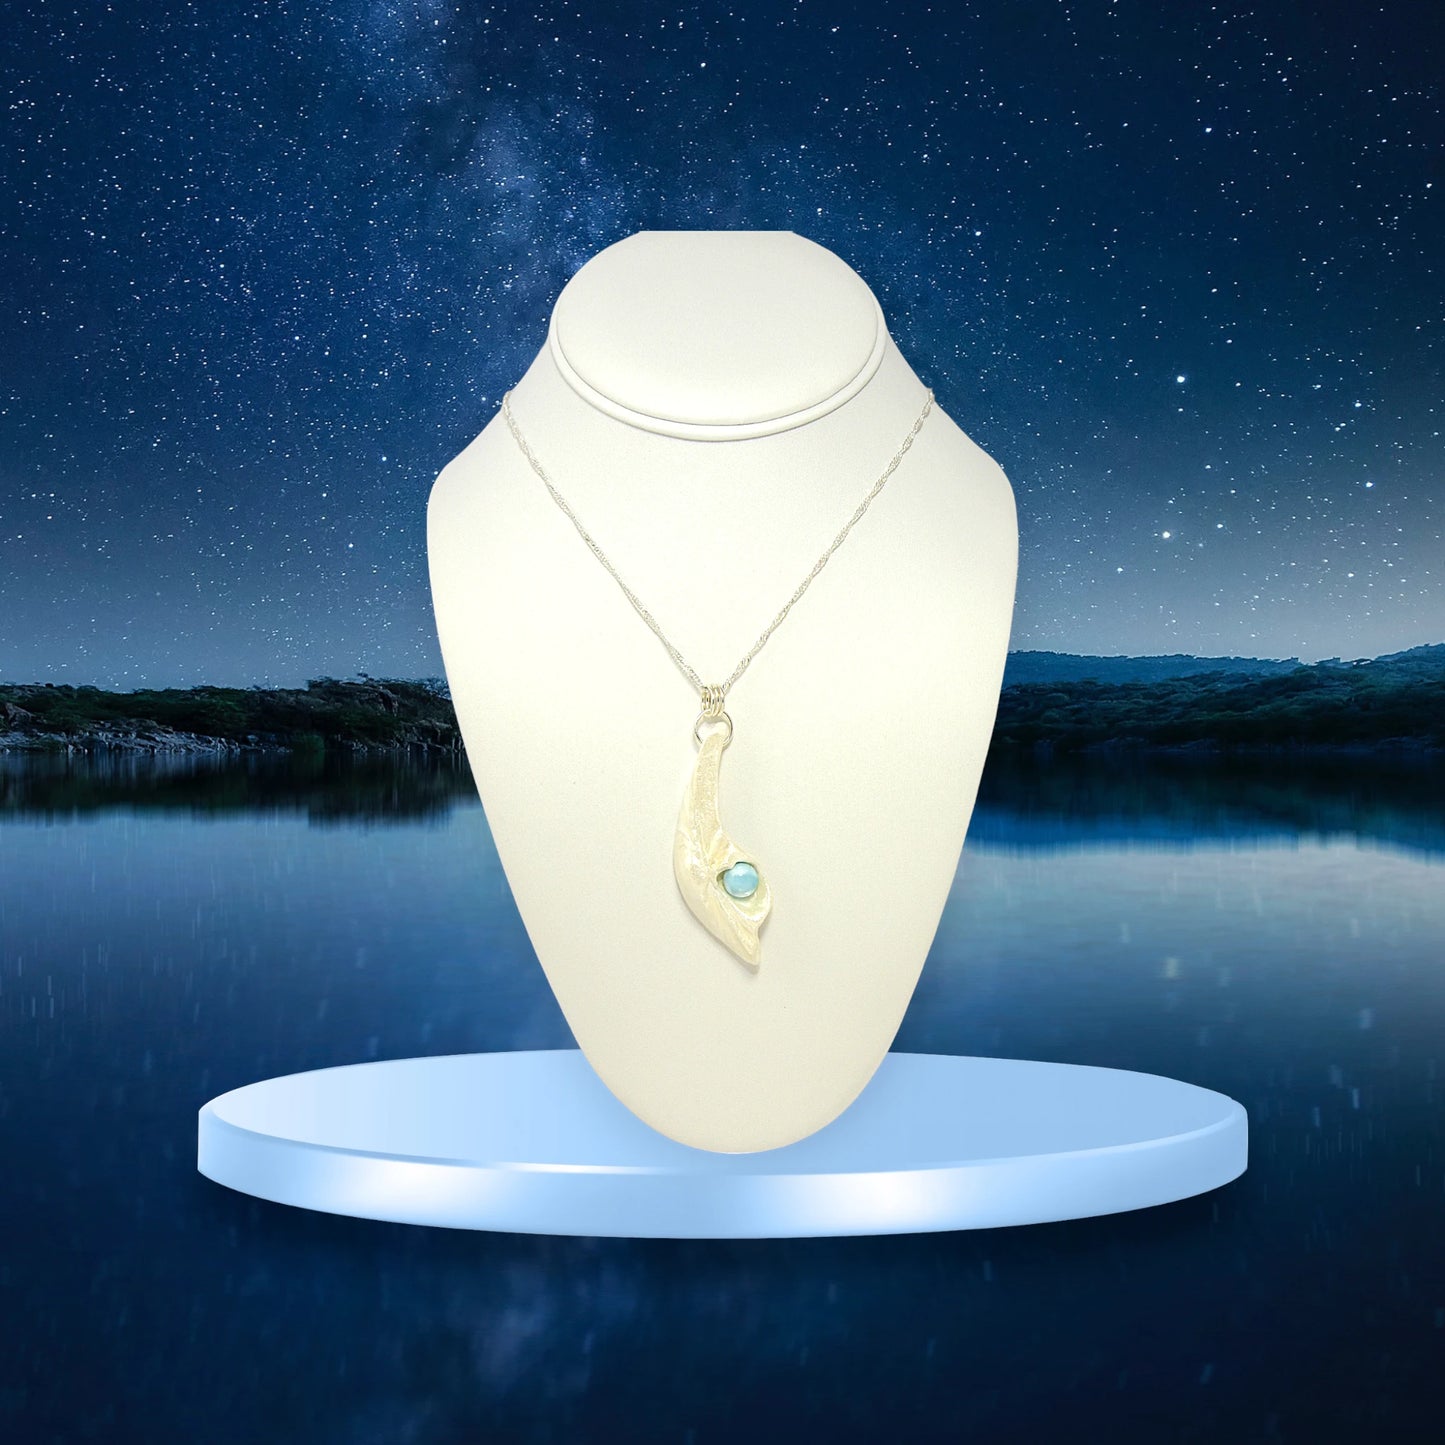 Larimar Moon Natural seashell a beautiful 10 mm Round Larimar Gemstone compliments the pendant. The pendant is shown on a white necklace displayer with a starry night background.